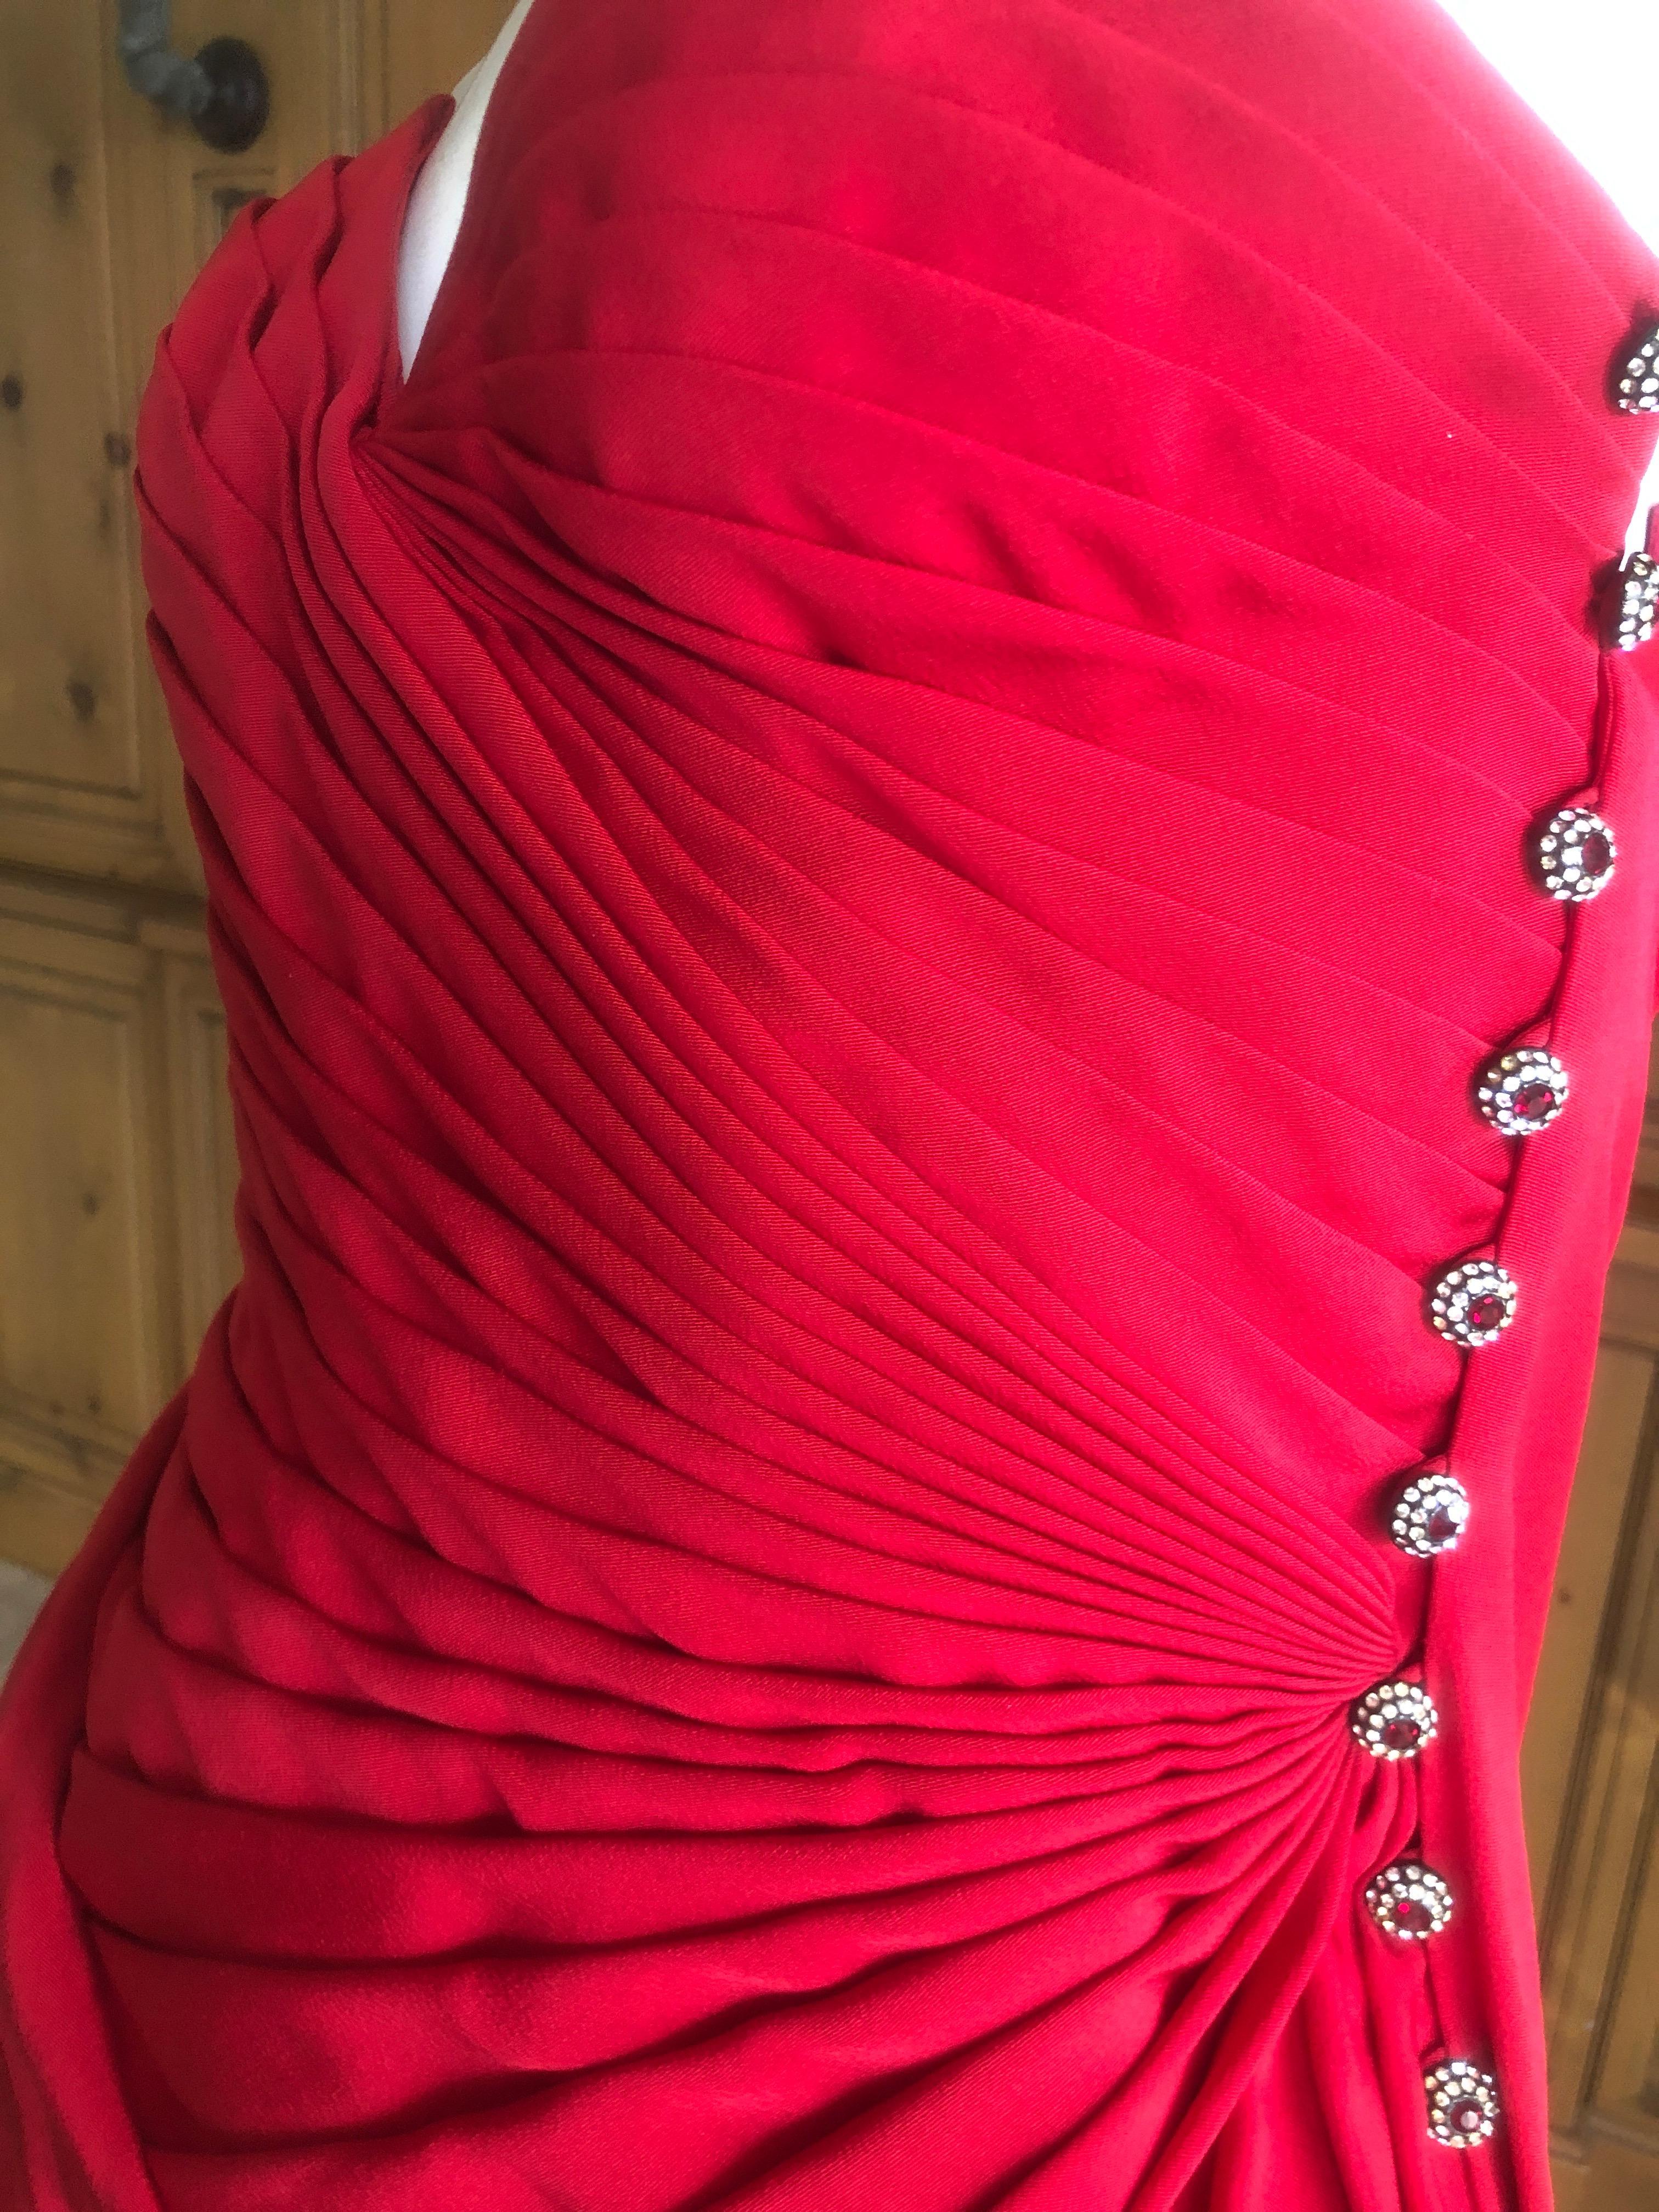 Emanuel Ungaro Numbered Haute Couture Fall 1984 Red  Strapless Evening Dress For Sale 5